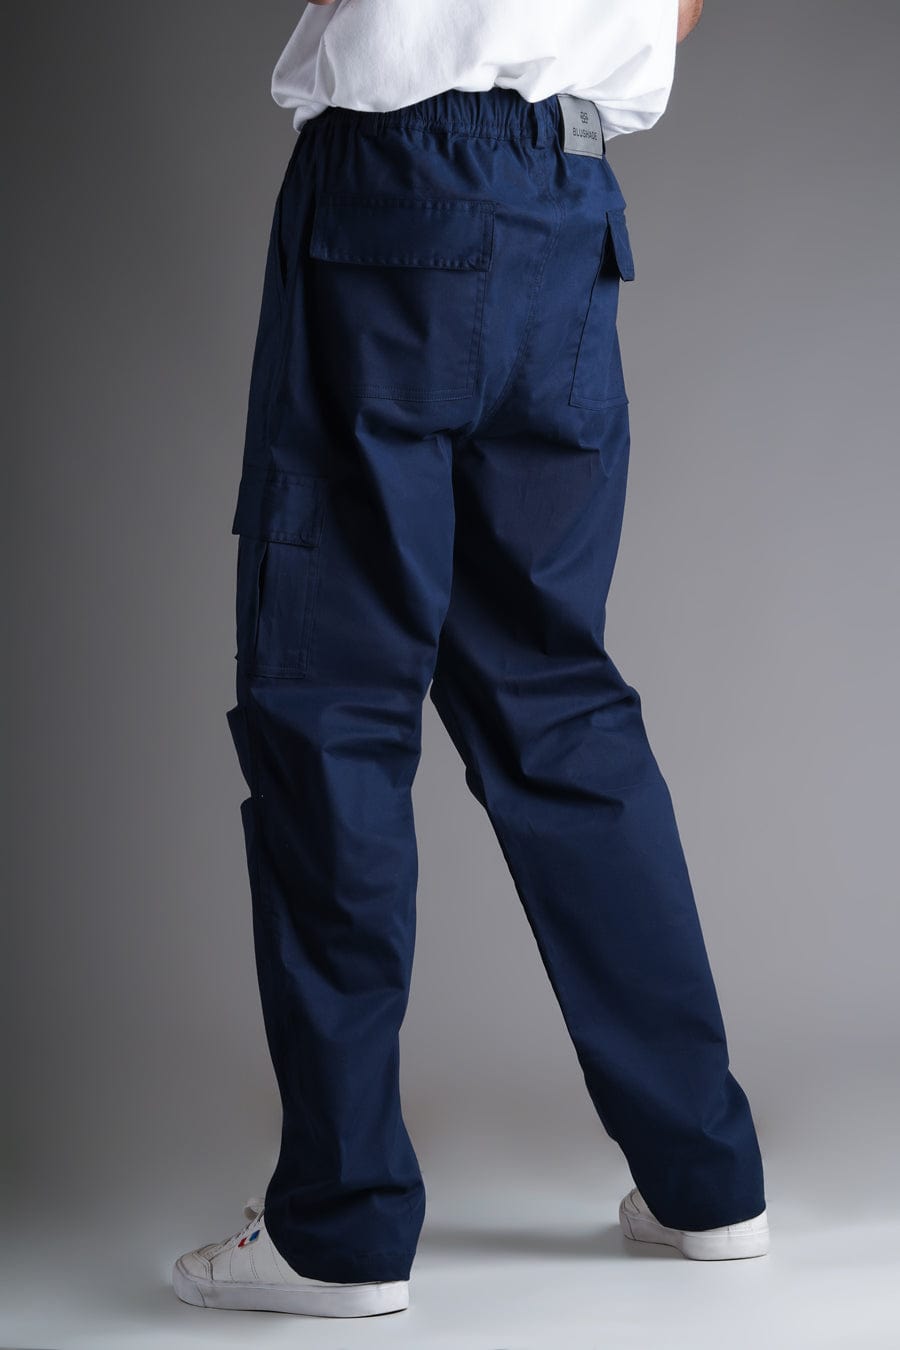 Reduced RQYYD Cargo Pants for Mens Lightweight Work Pants Hiking Ripstop Cargo  Pants Cargo Pant-Reg and Big and Tall Sizes(Navy,3XL) - Walmart.com